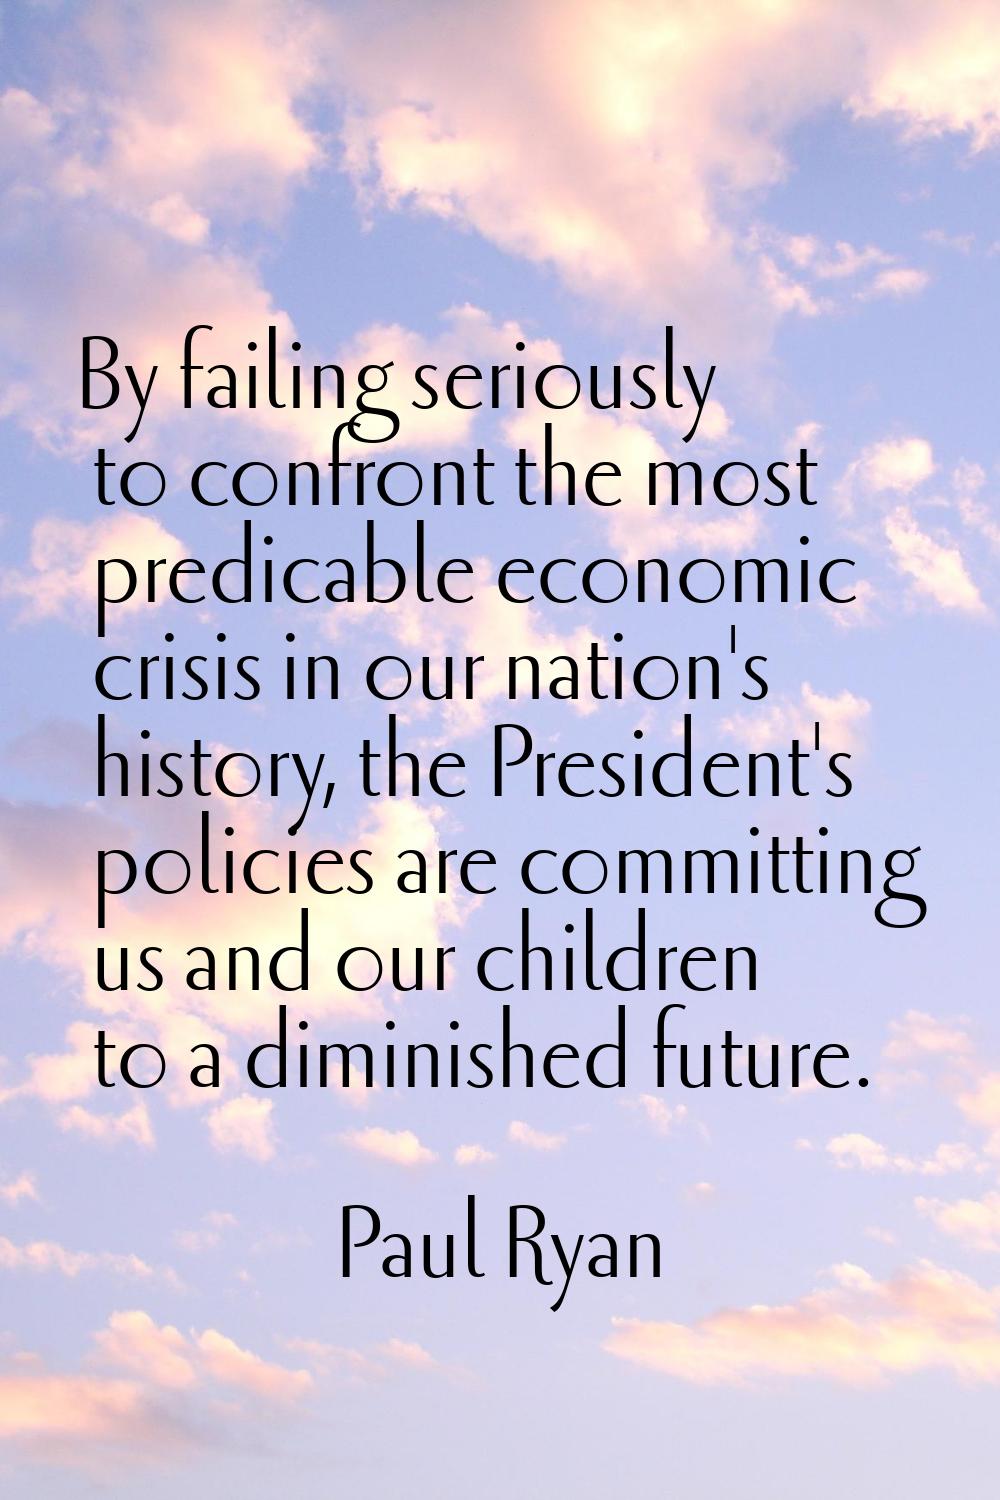 By failing seriously to confront the most predicable economic crisis in our nation's history, the P